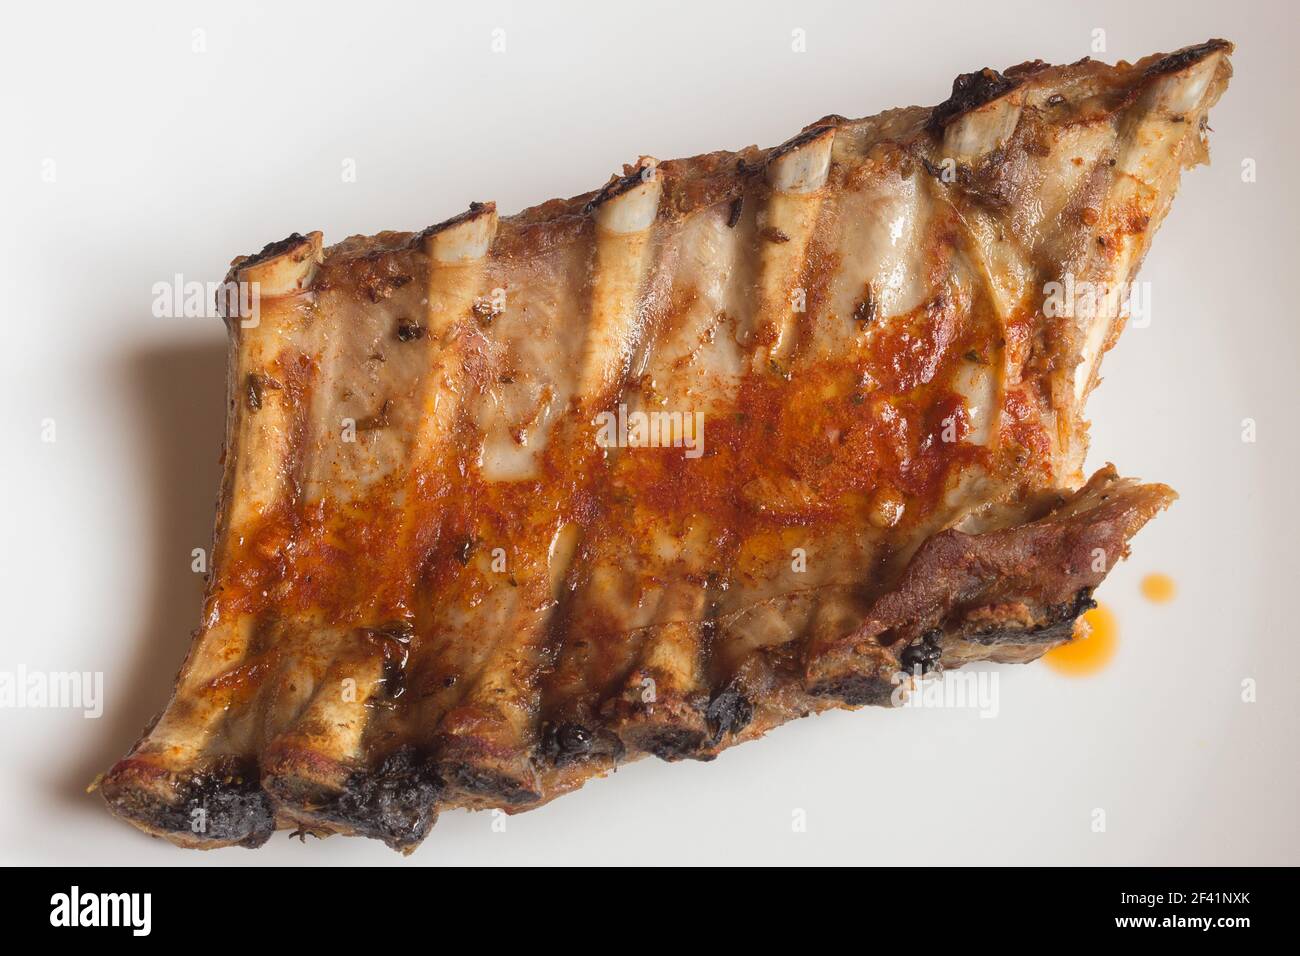 Overhead view of baked pork ribs dipped in a spicy sauce on white background. Tasty homemade meat recipes. Stock Photo